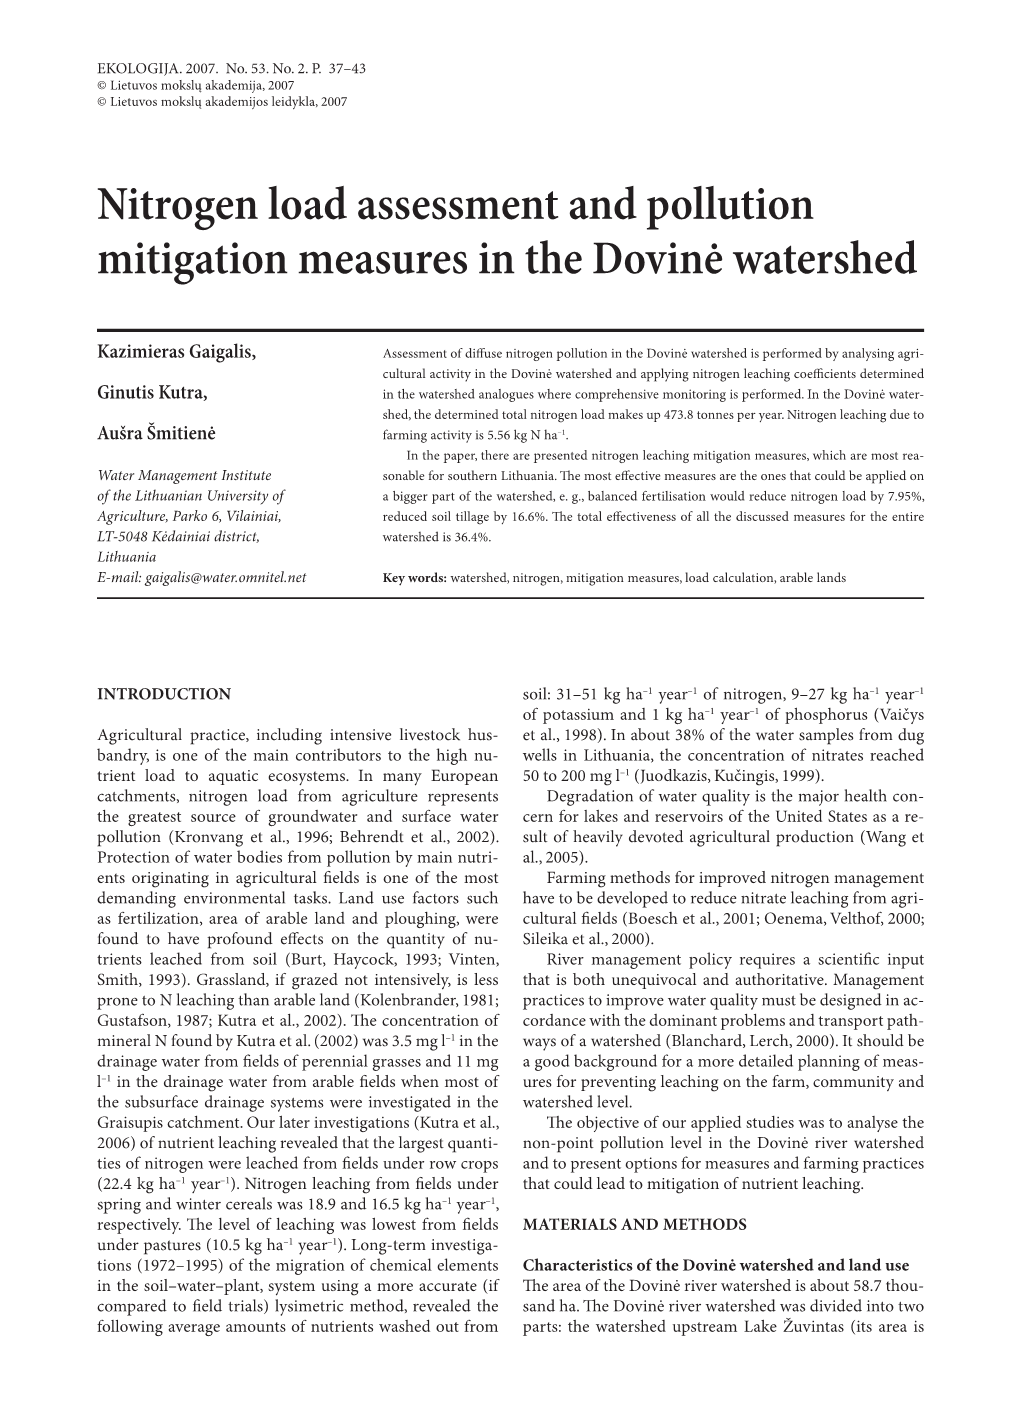 Nitrogen Load Assessment and Pollution Mitigation Measures in the Dovinė Watershed